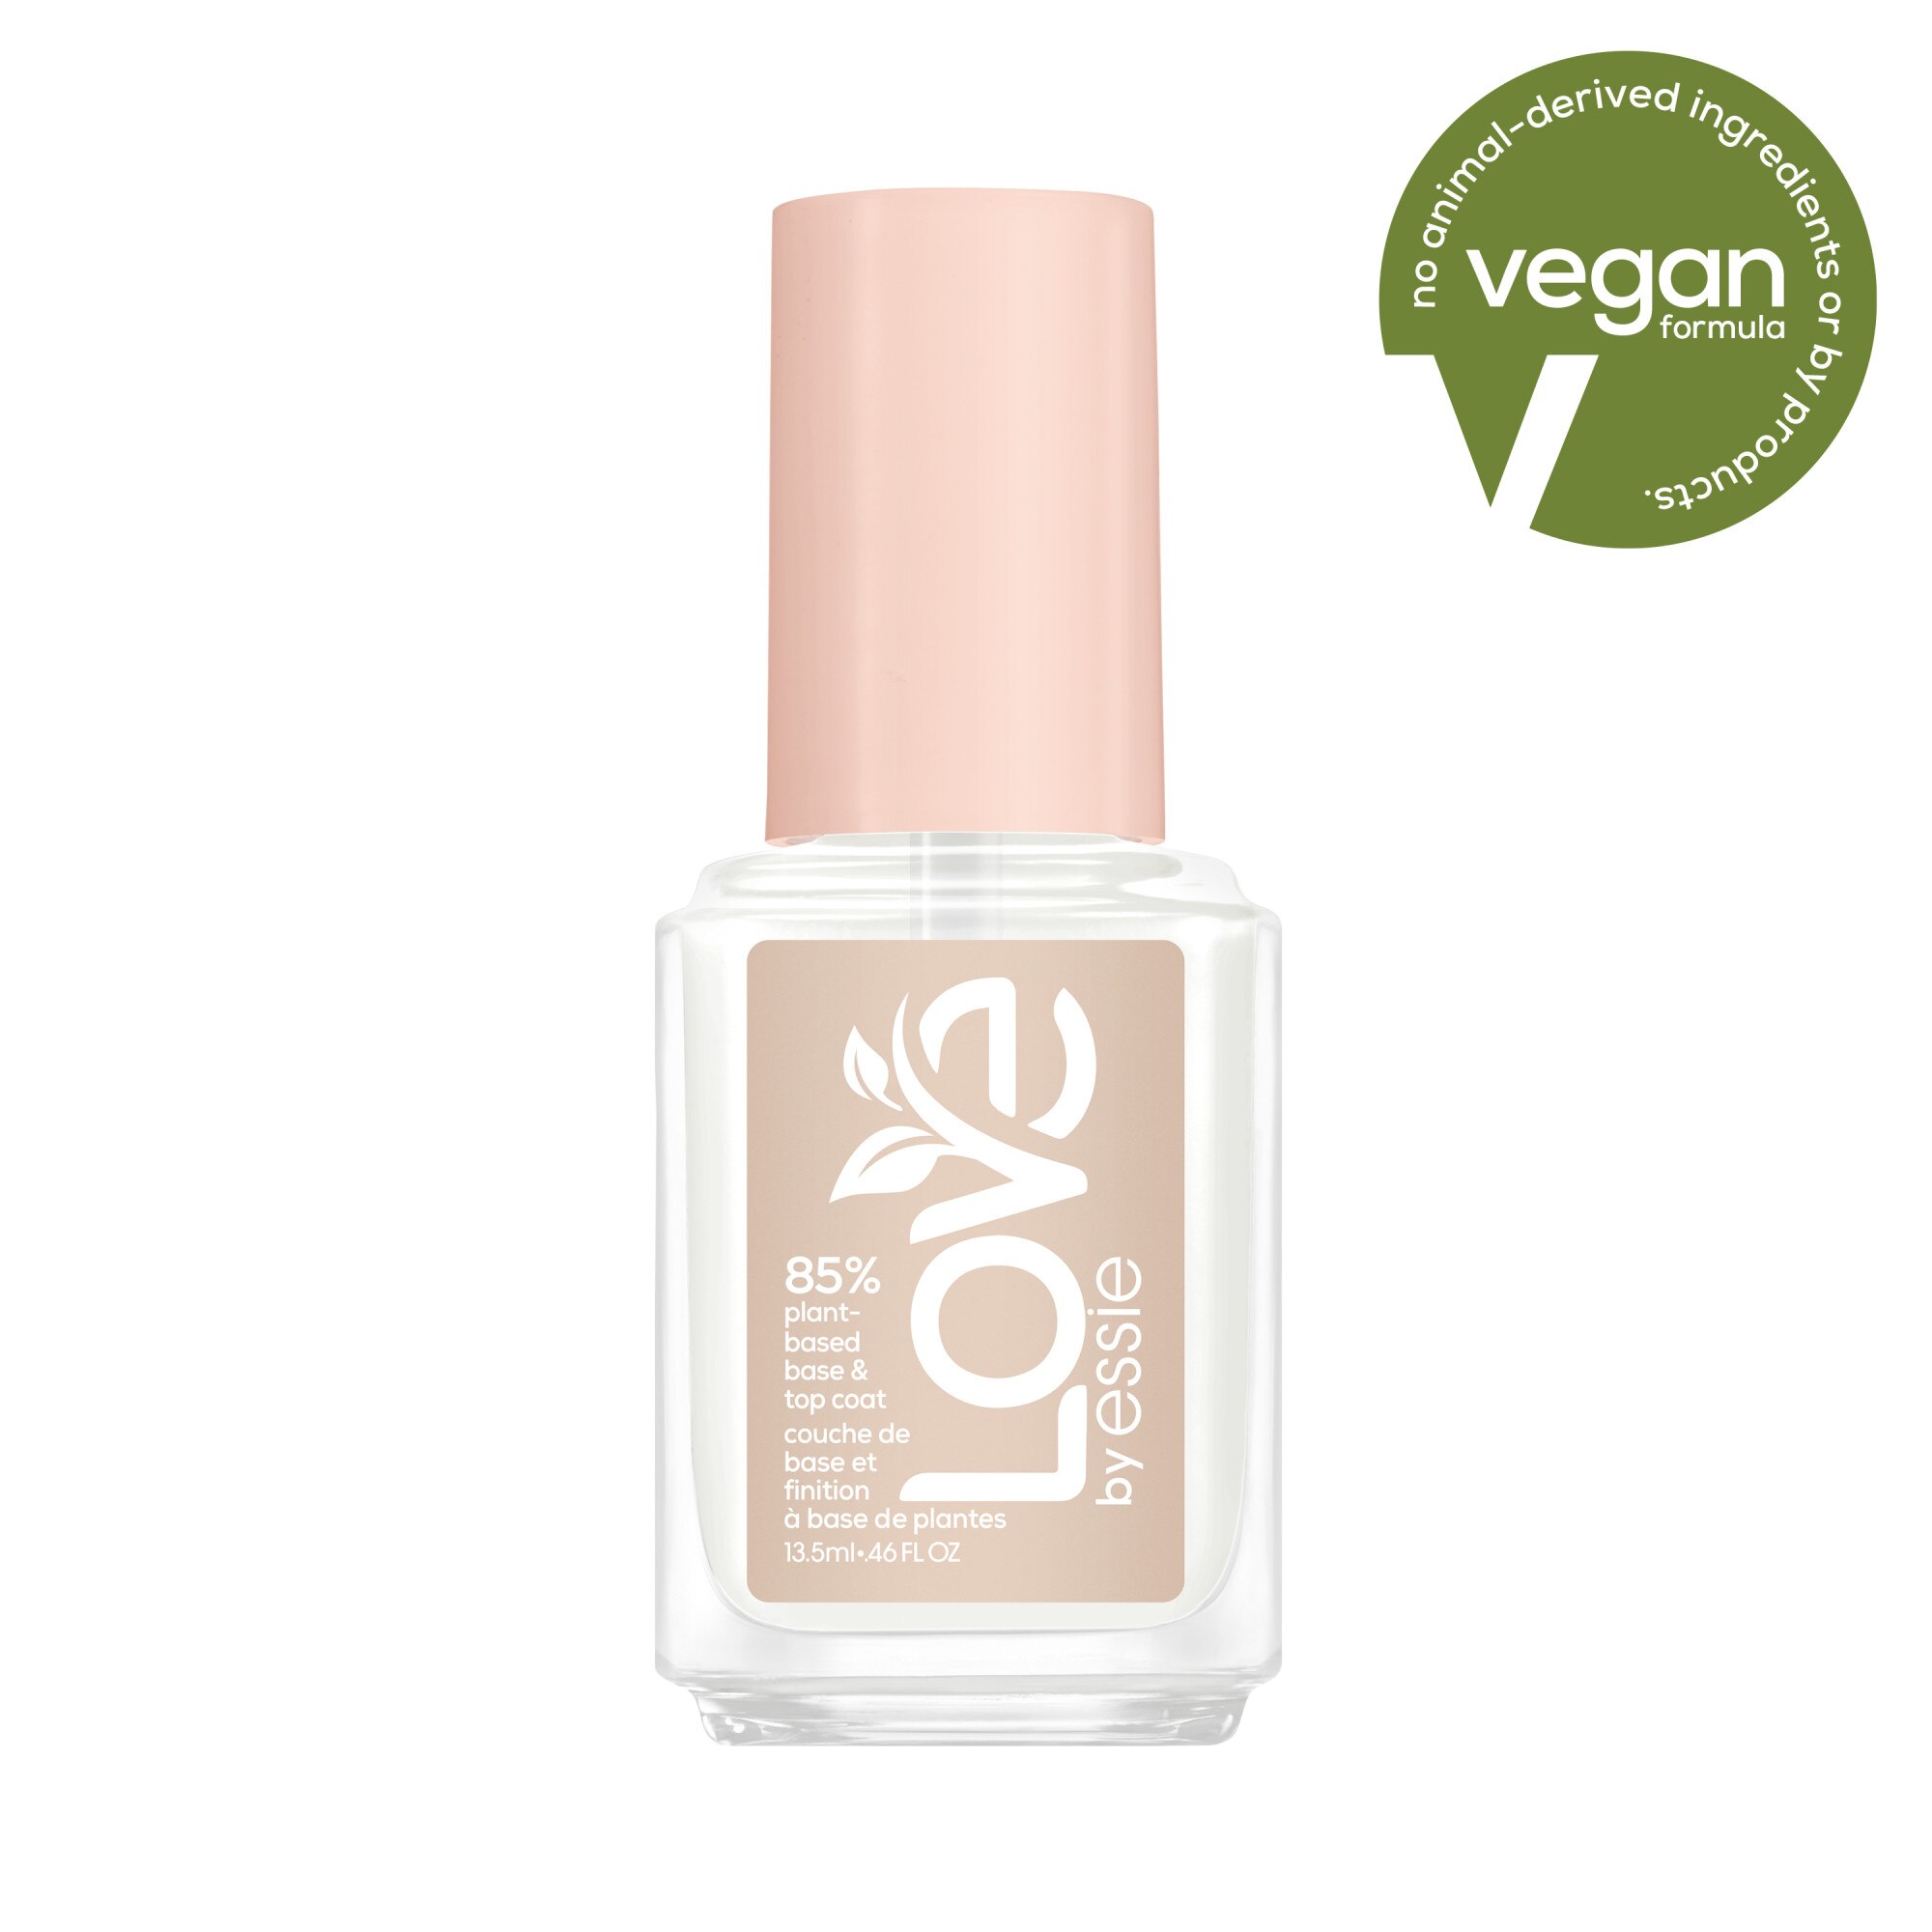 LOVE By Essie 85 Percent Plant-based Nail Care, Vegan, LOVE By Essie Base And Top Coat , 0.46 Fl Oz , CVS